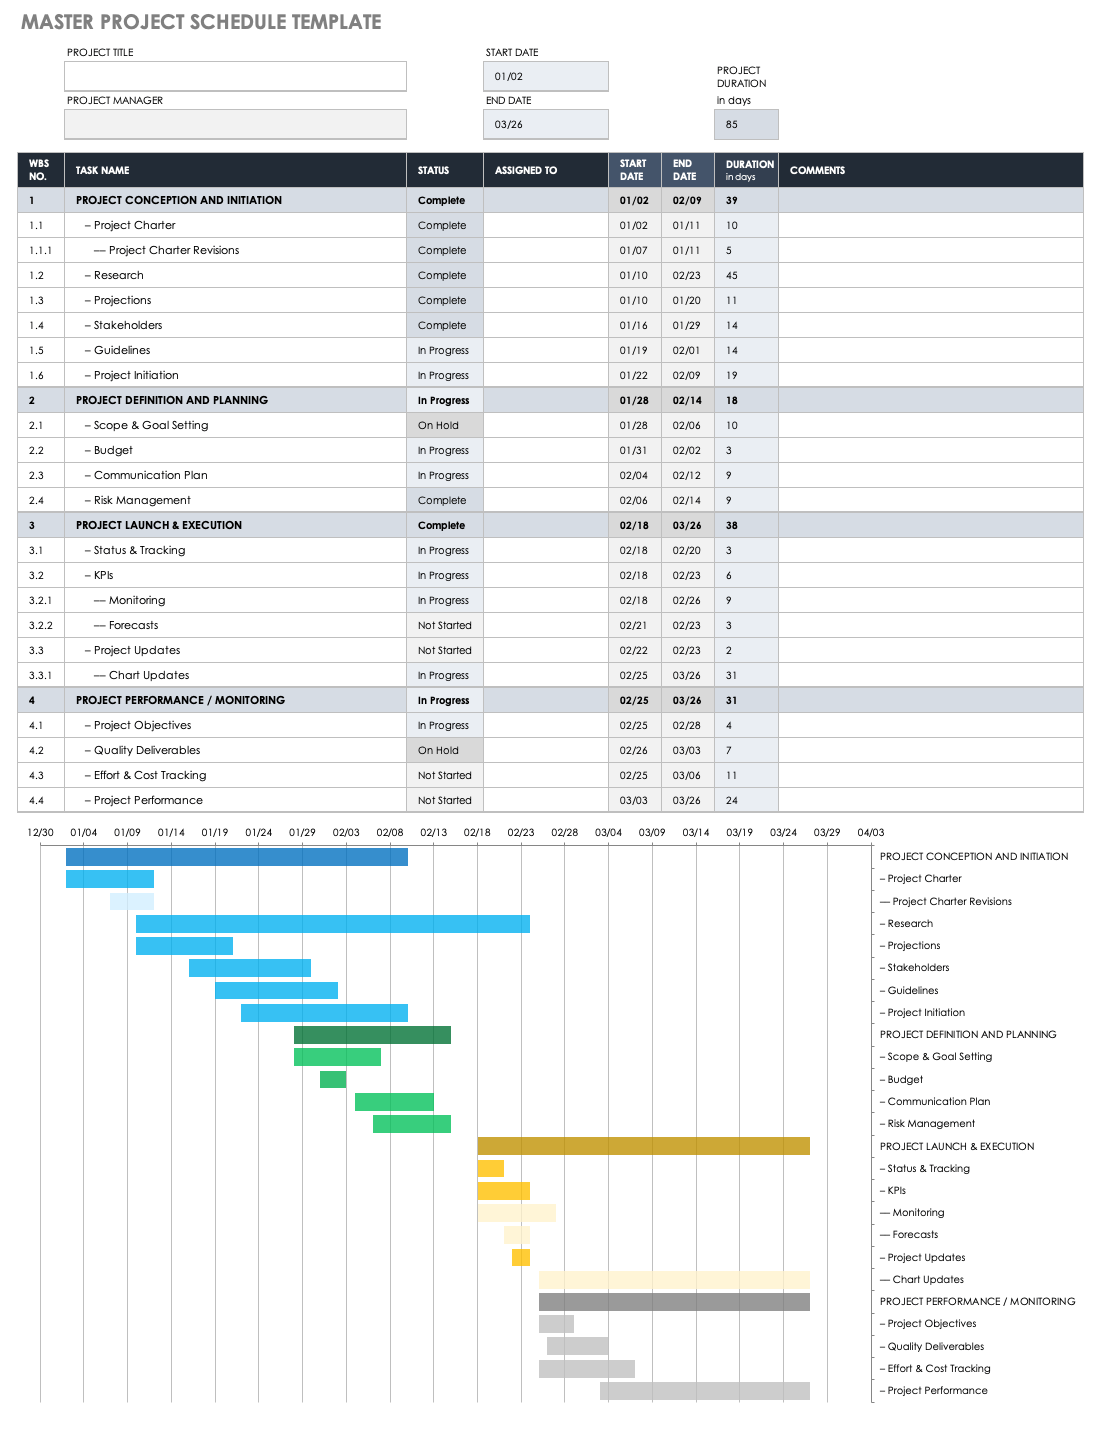 Master Project Schedule Template